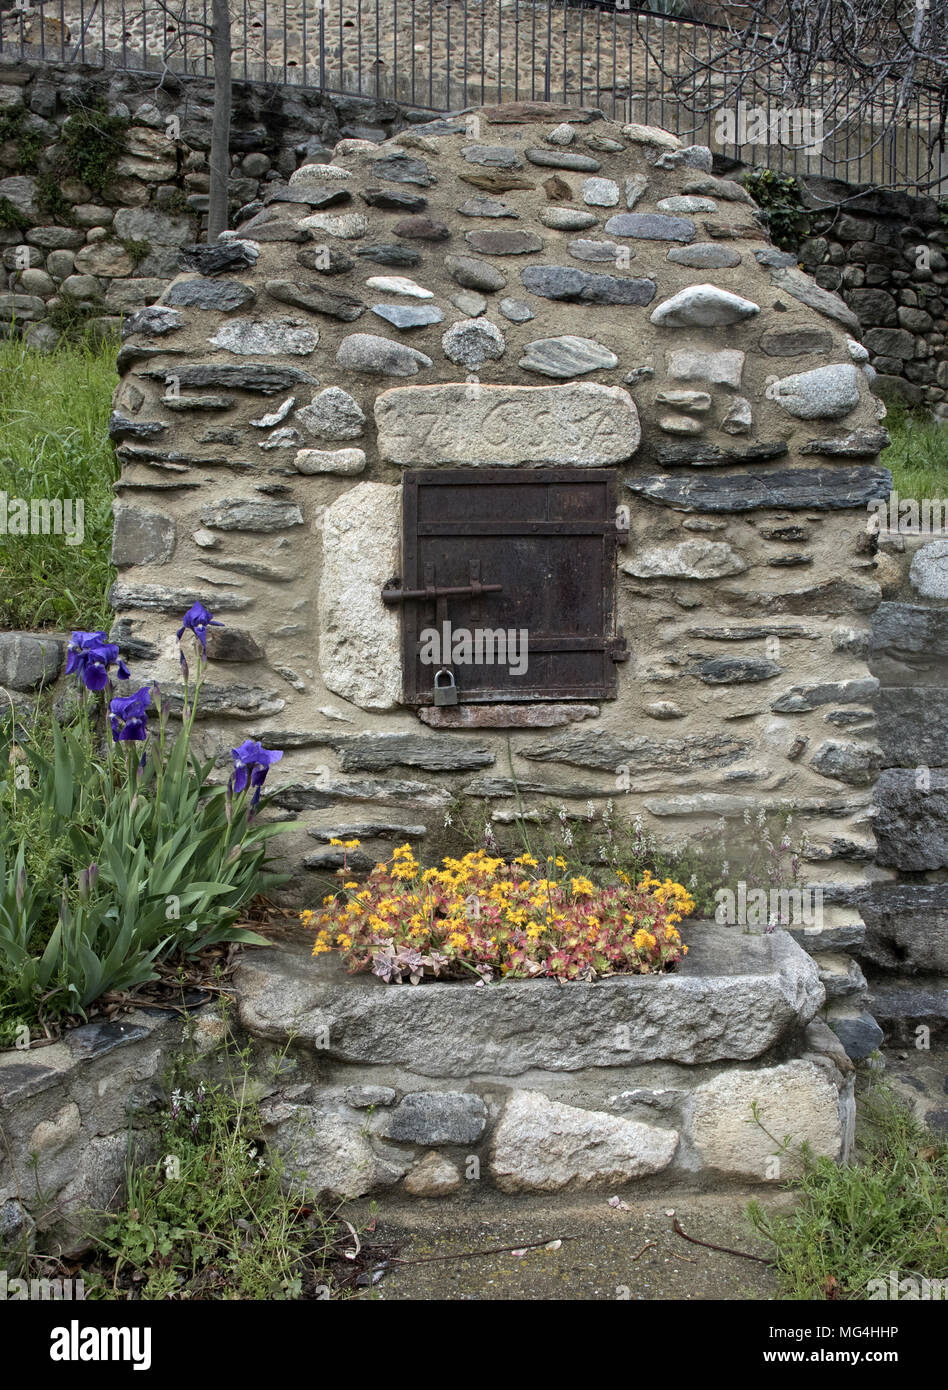 Old stone french oven in the village of Catllar, near Prades, with sedum and irises, Languedoc-Roussillon, Pyrénées-Orientales, France. Stock Photo